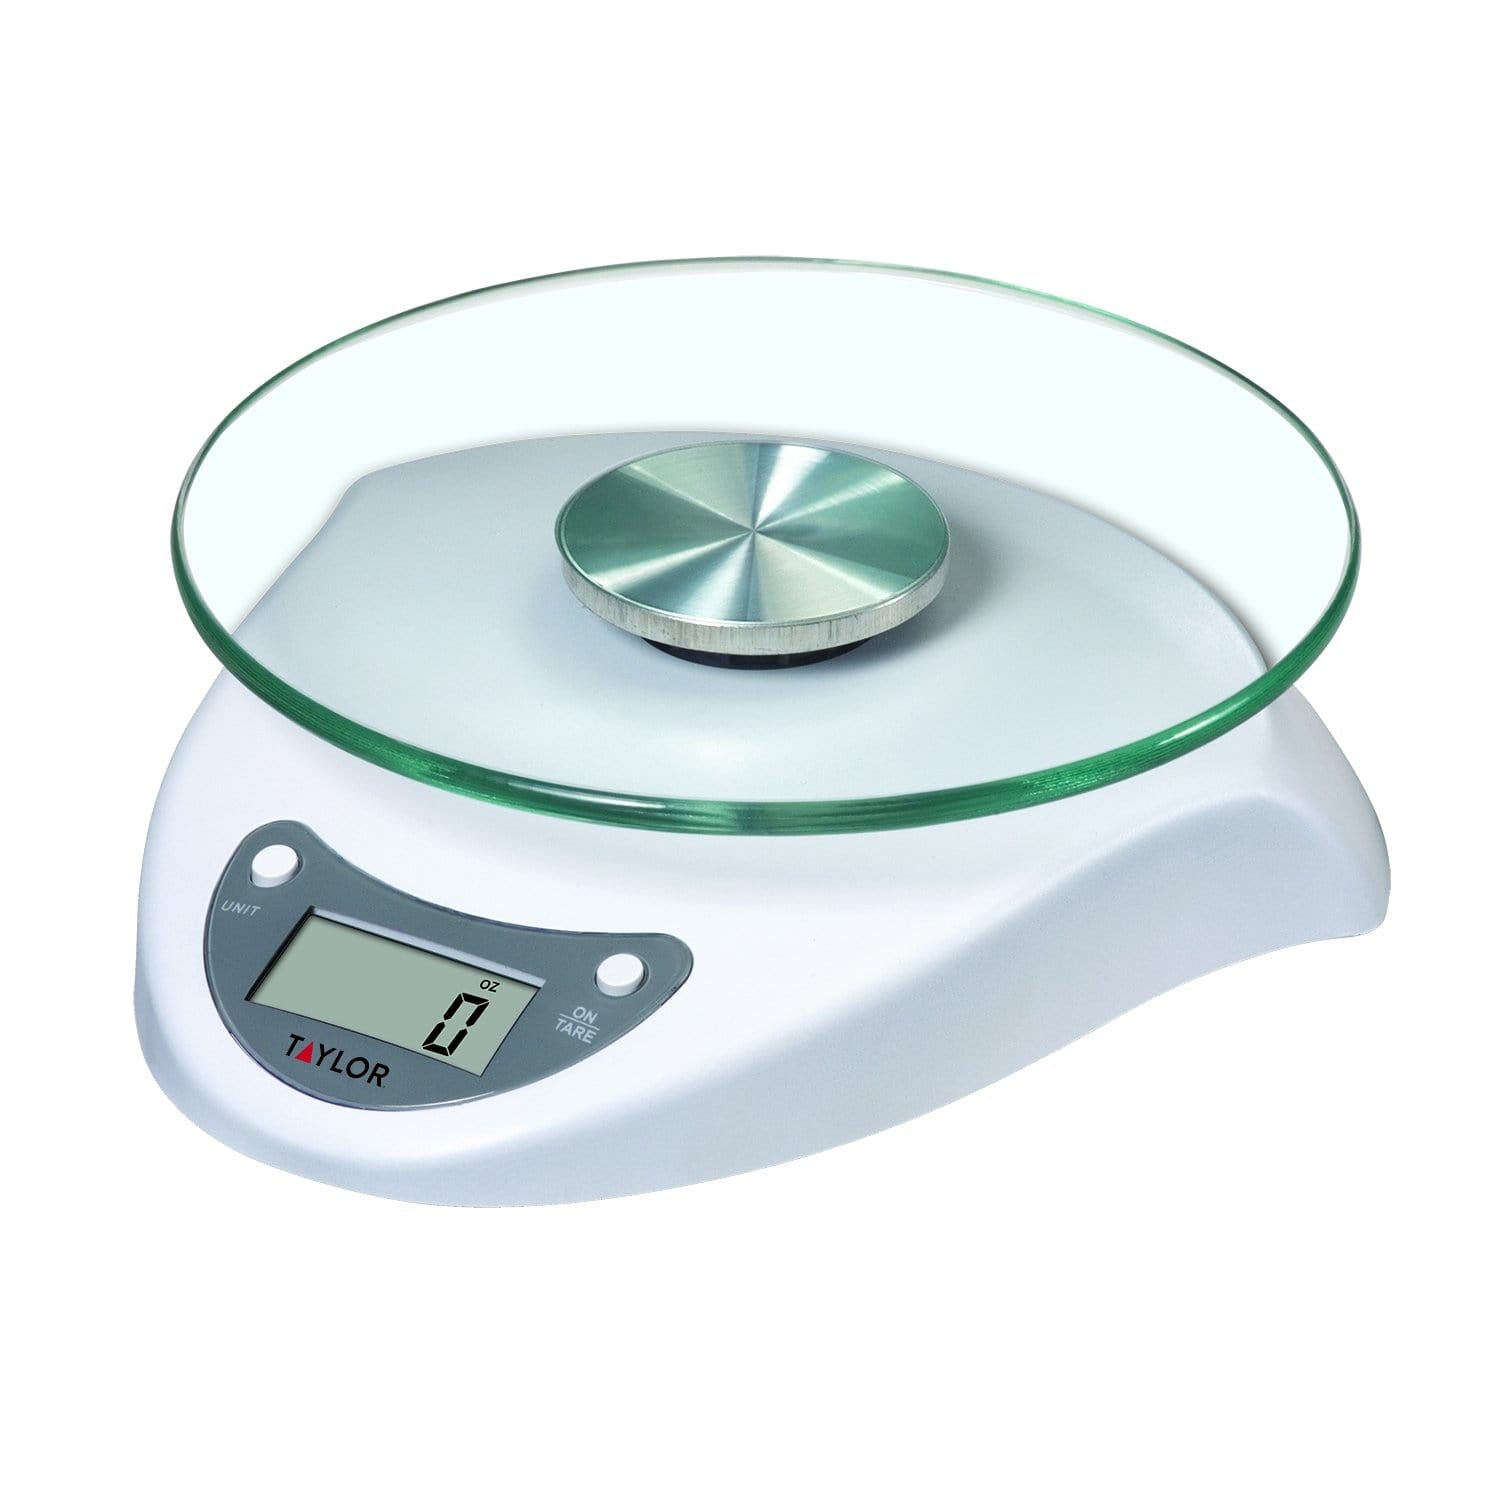 Taylor Digital Glass Food Scale 3831S